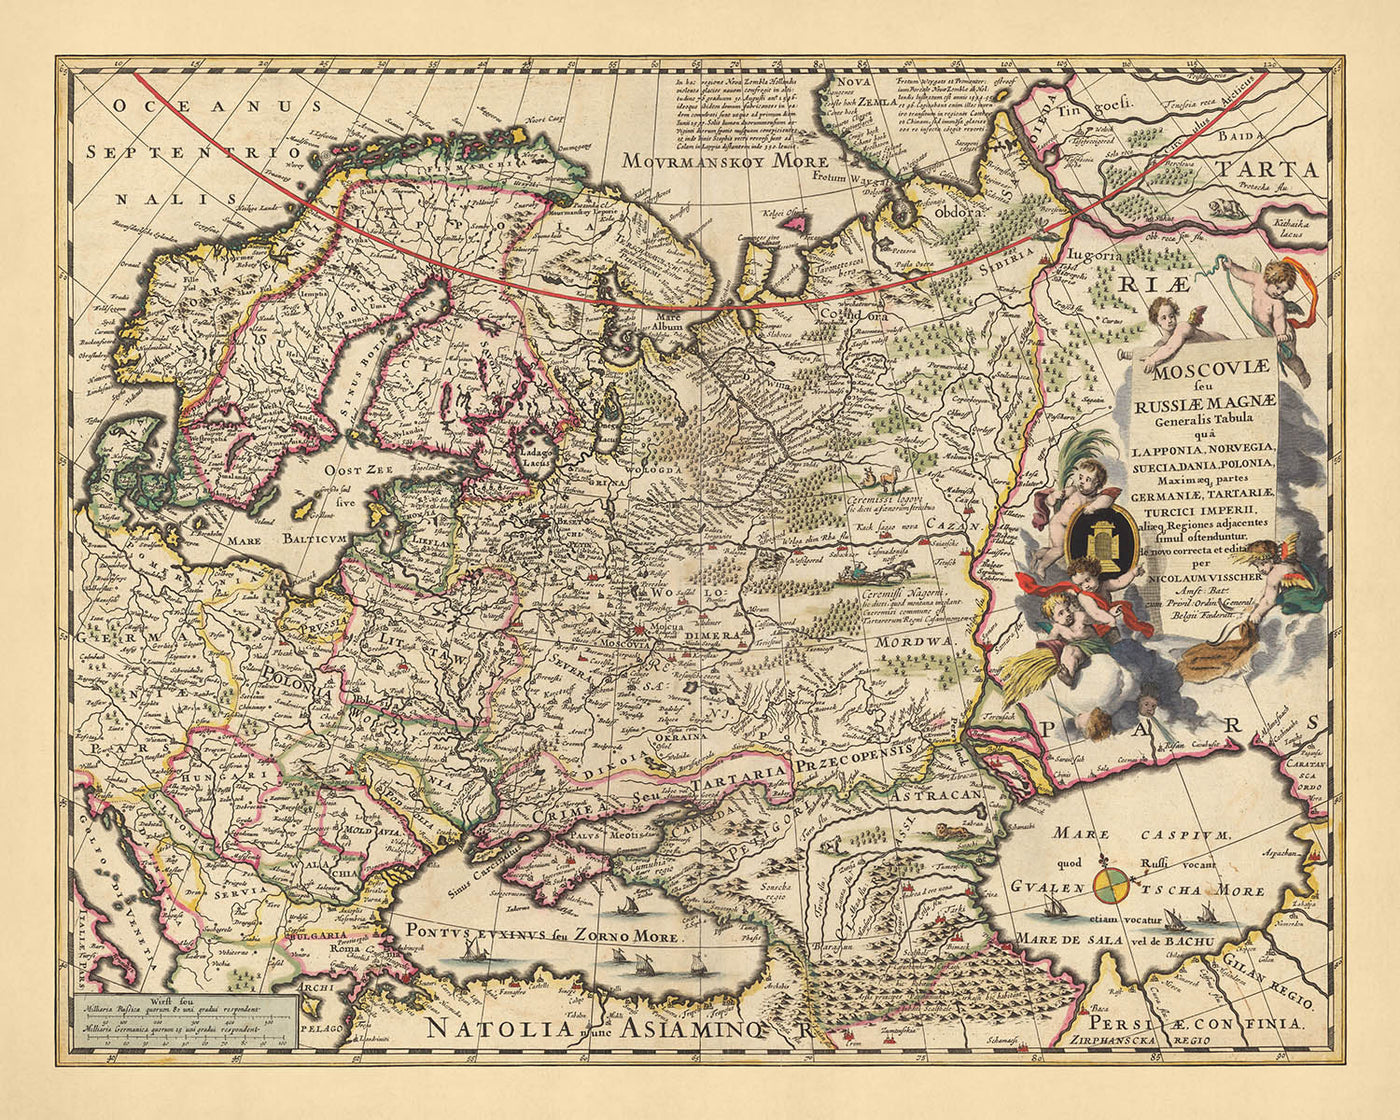 Old Map of Russia by Visscher, 1690: Moscow, Warsaw, Budapest, Oslo, Stockholm